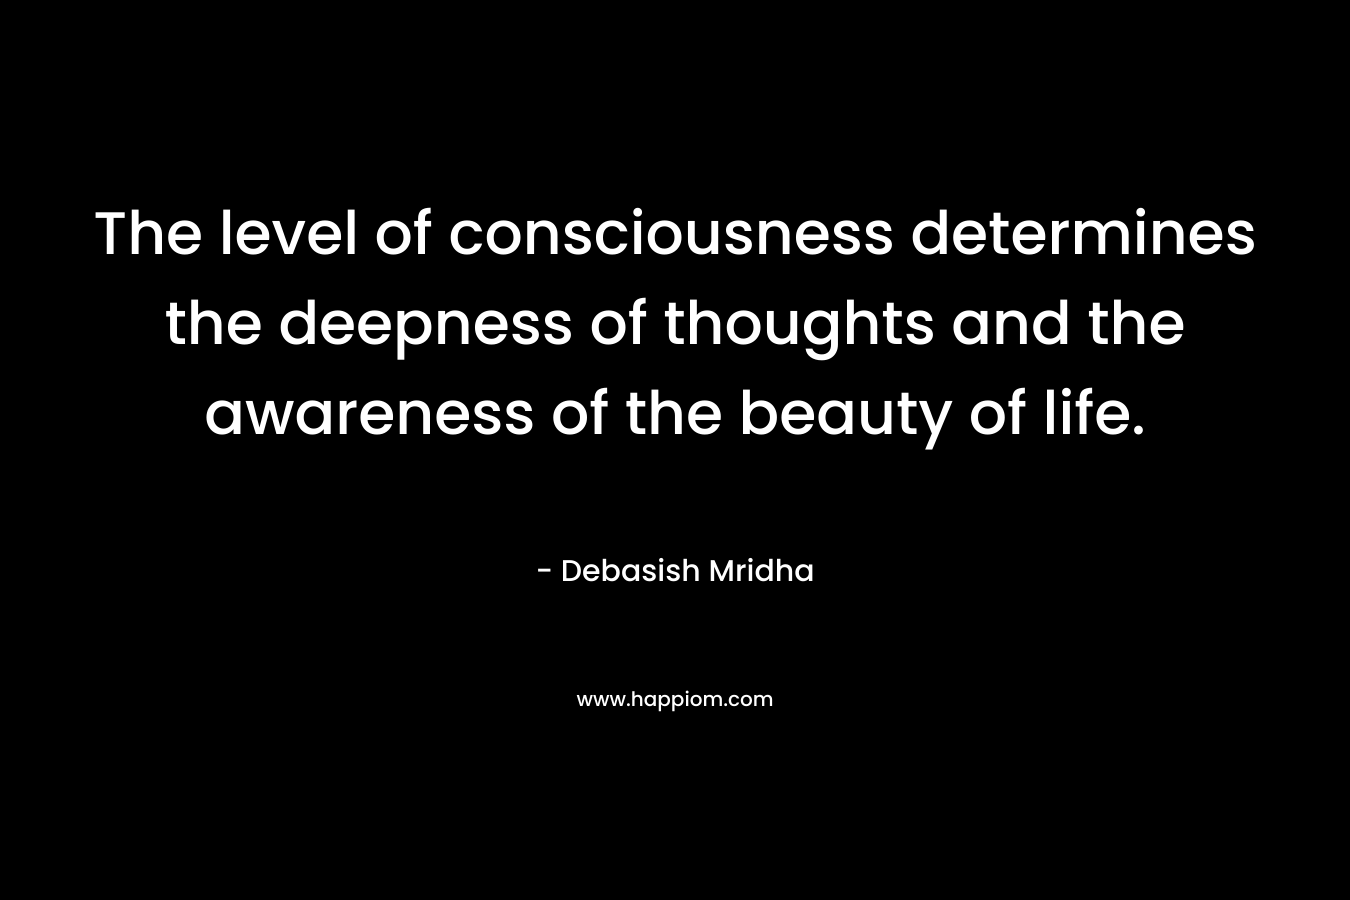 The level of consciousness determines the deepness of thoughts and the awareness of the beauty of life.